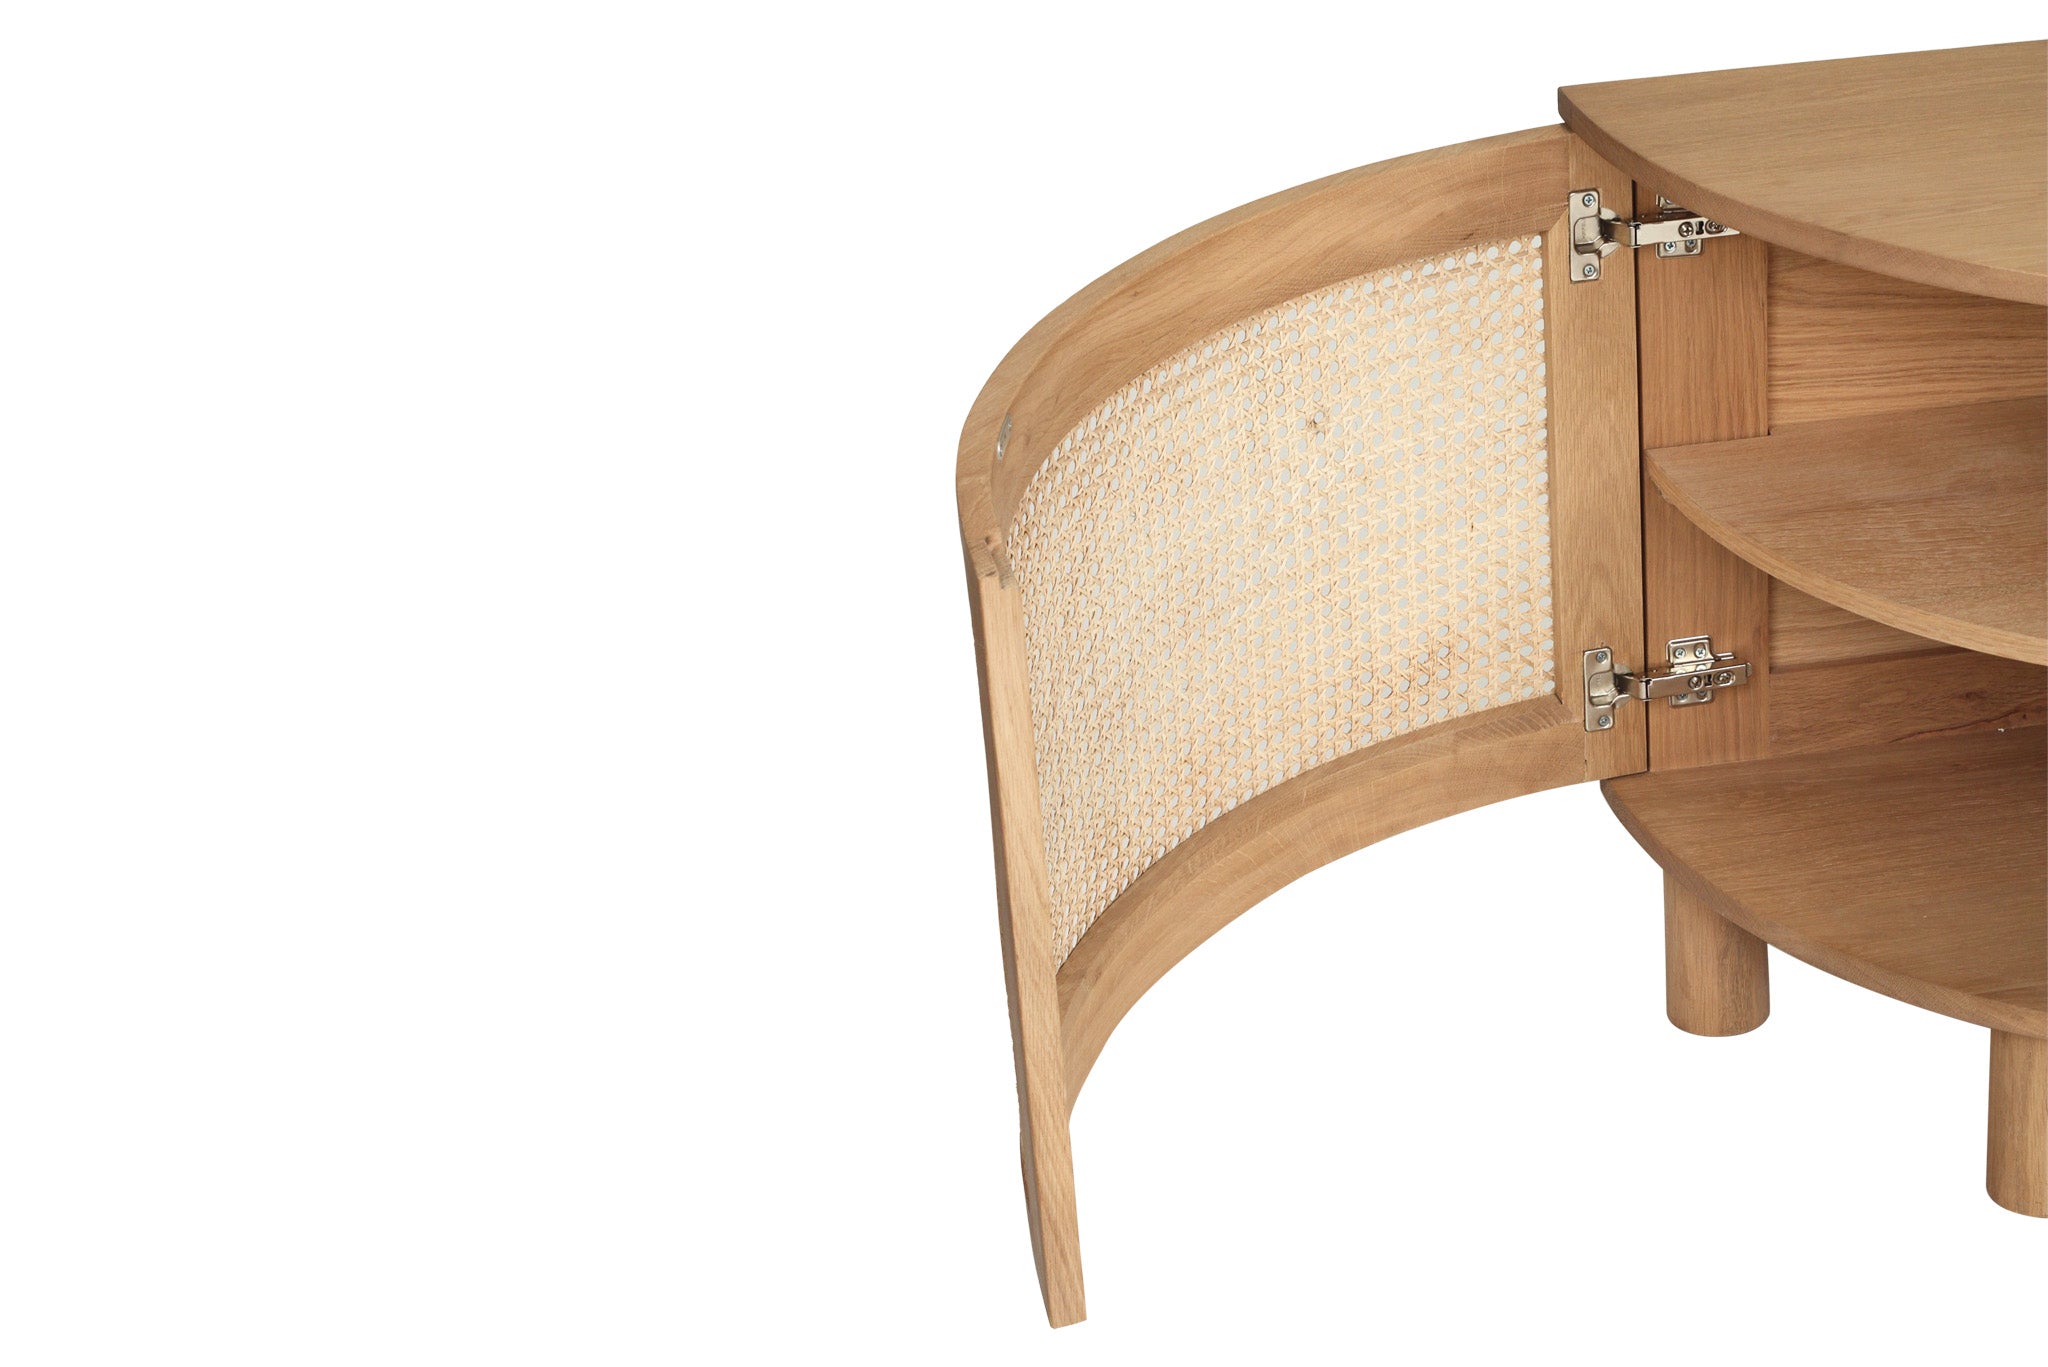 Griffith American Oak Bedside Tables – Left and Right Pair